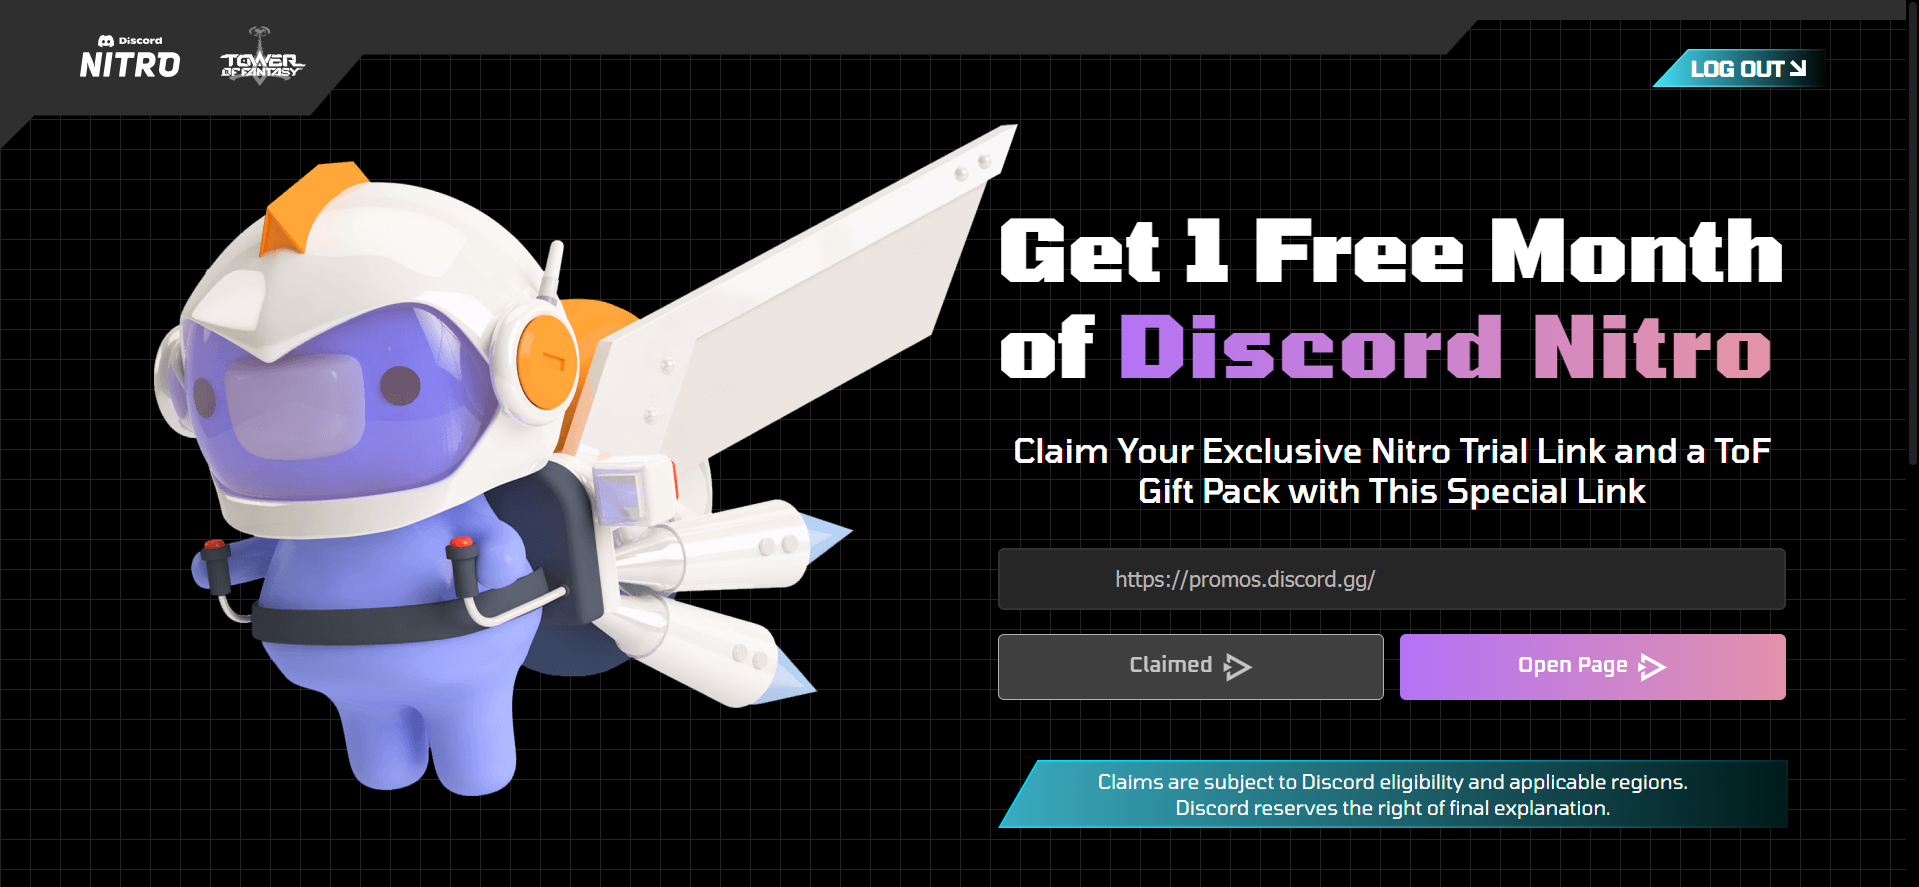 Ways to get Discord Nitro for 1, 2 or 3 months - Freebie, Promo code, Is free, Stock, Discord, Subscription, Services, Xbox, Steelseries, Nitro, Discounts, Distribution, Computer games, Purchase, Appendix, Video, Youtube, Longpost